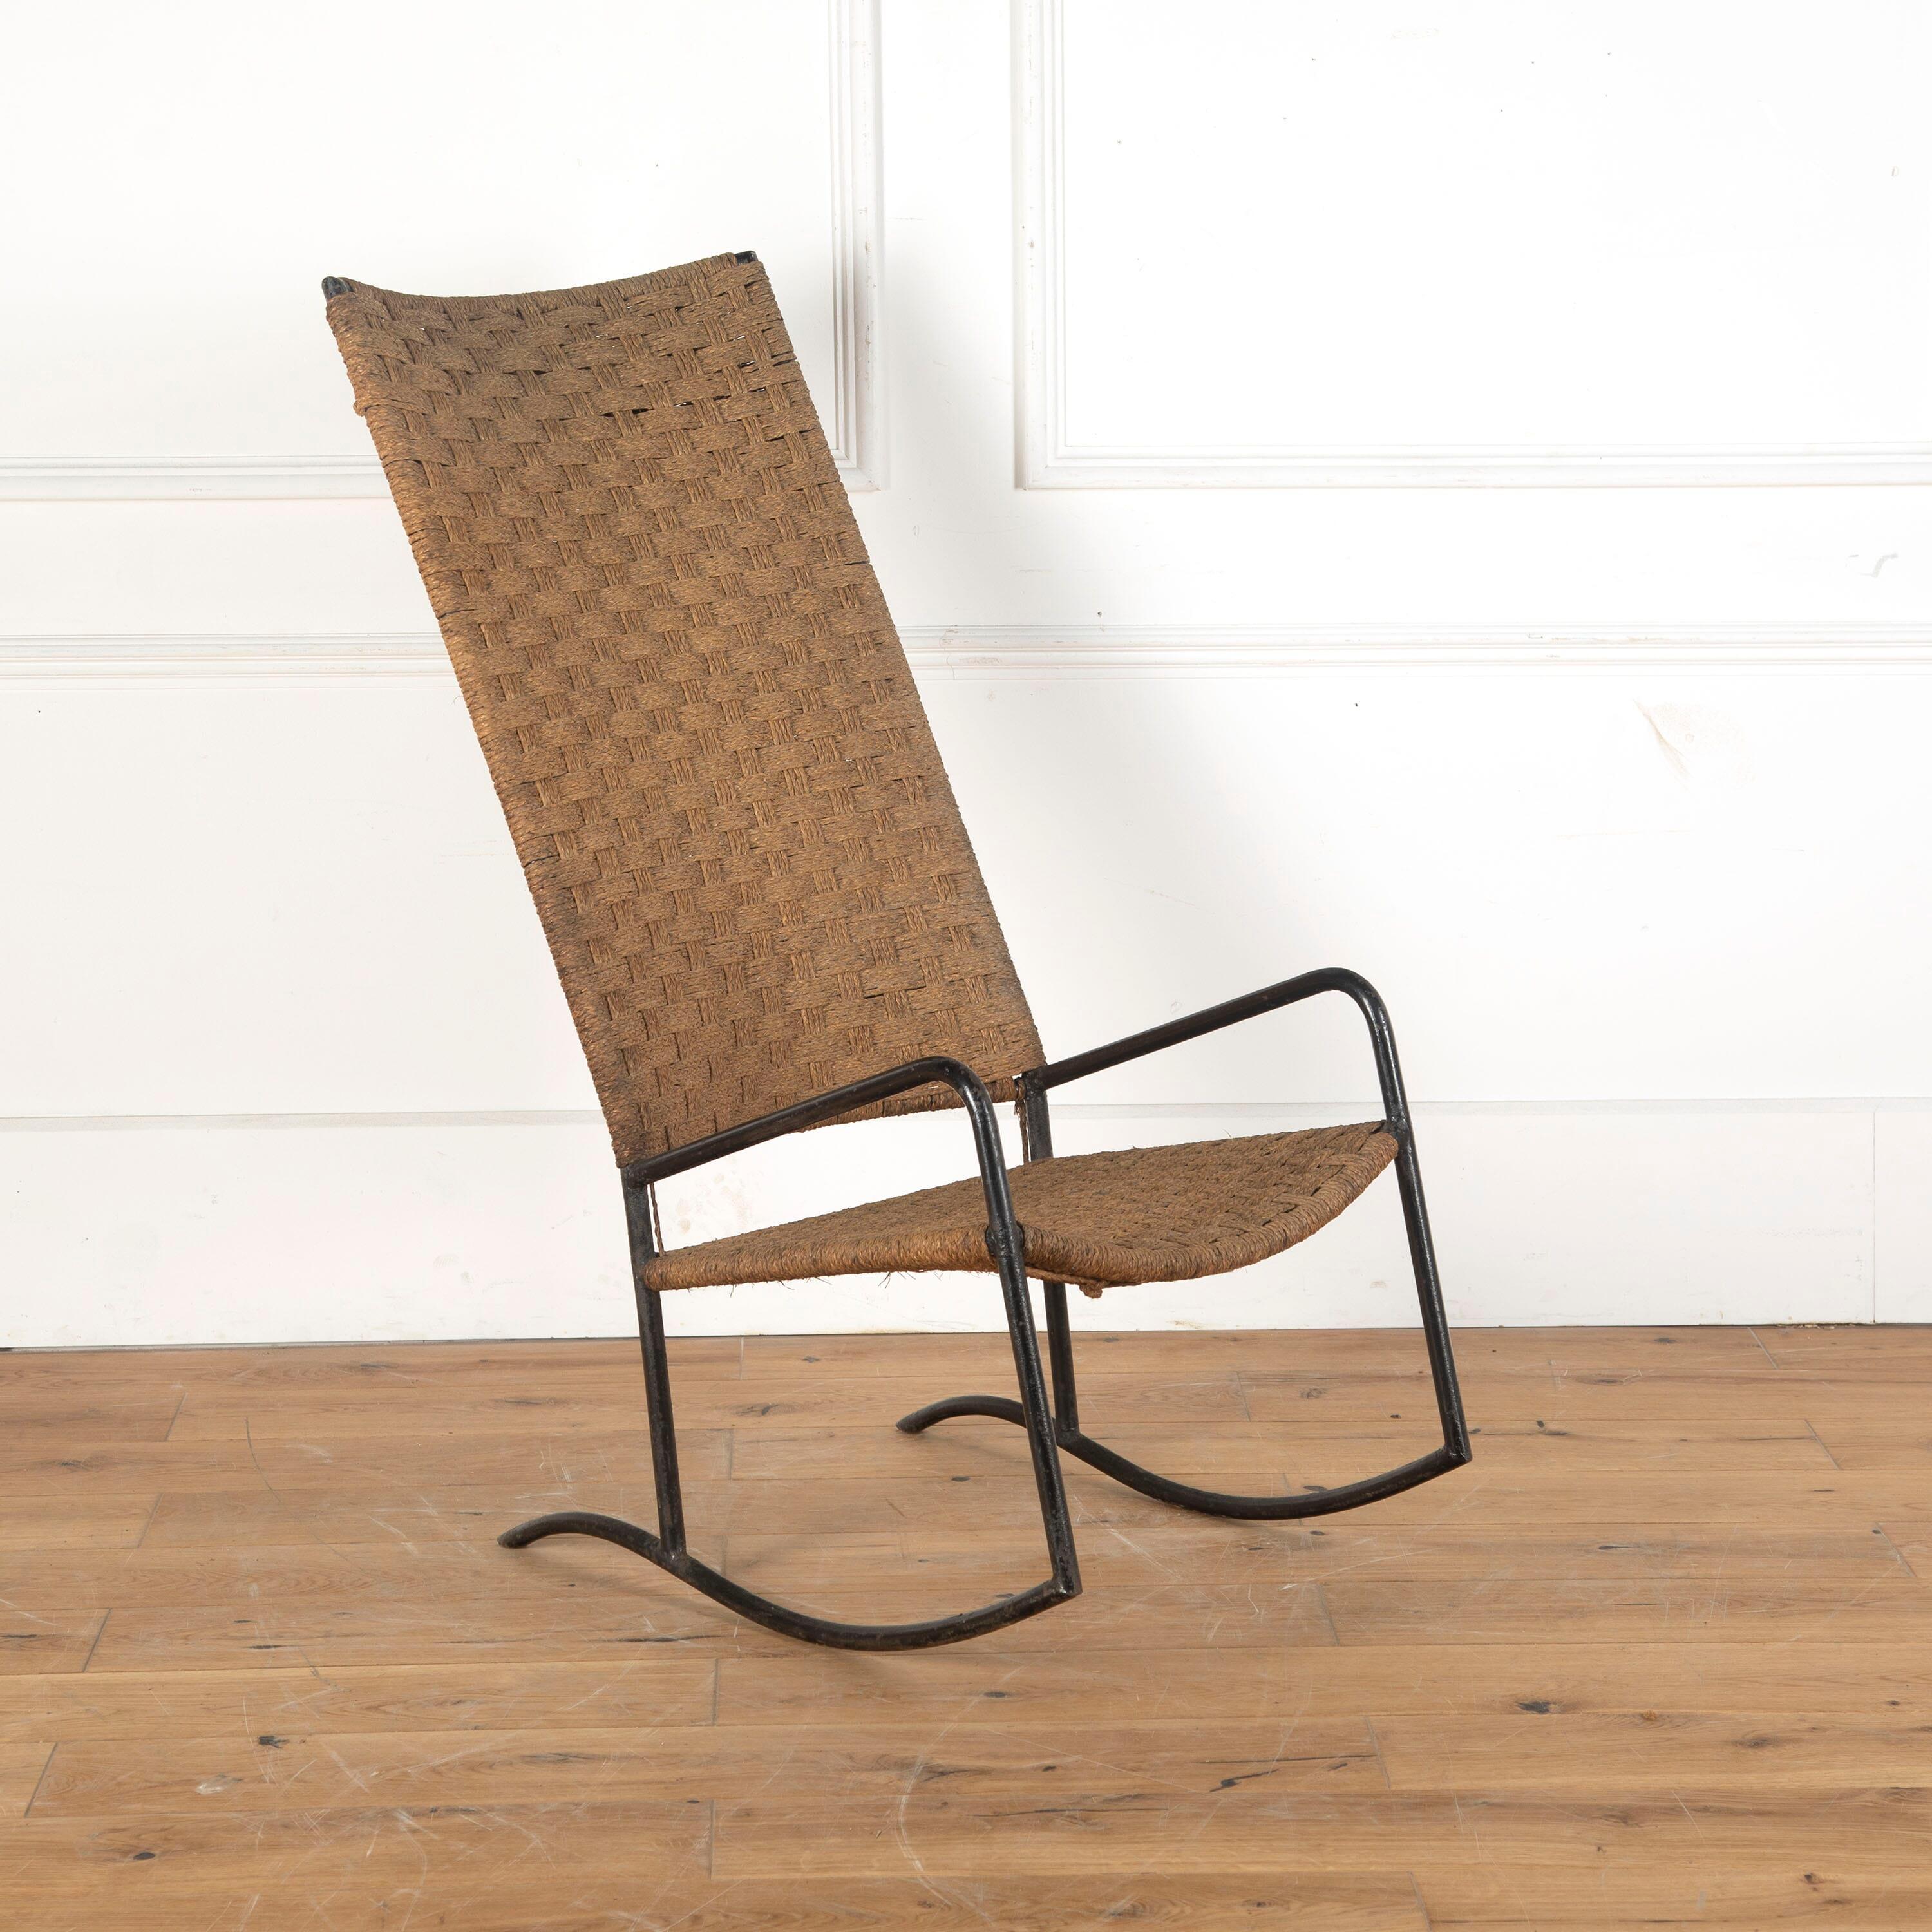 Stylish 1960s Spanish metal and seagrass chair, with a rocking base.

Featuring a long rectangular back and seagrass seat on a patinated tubular metal frame.